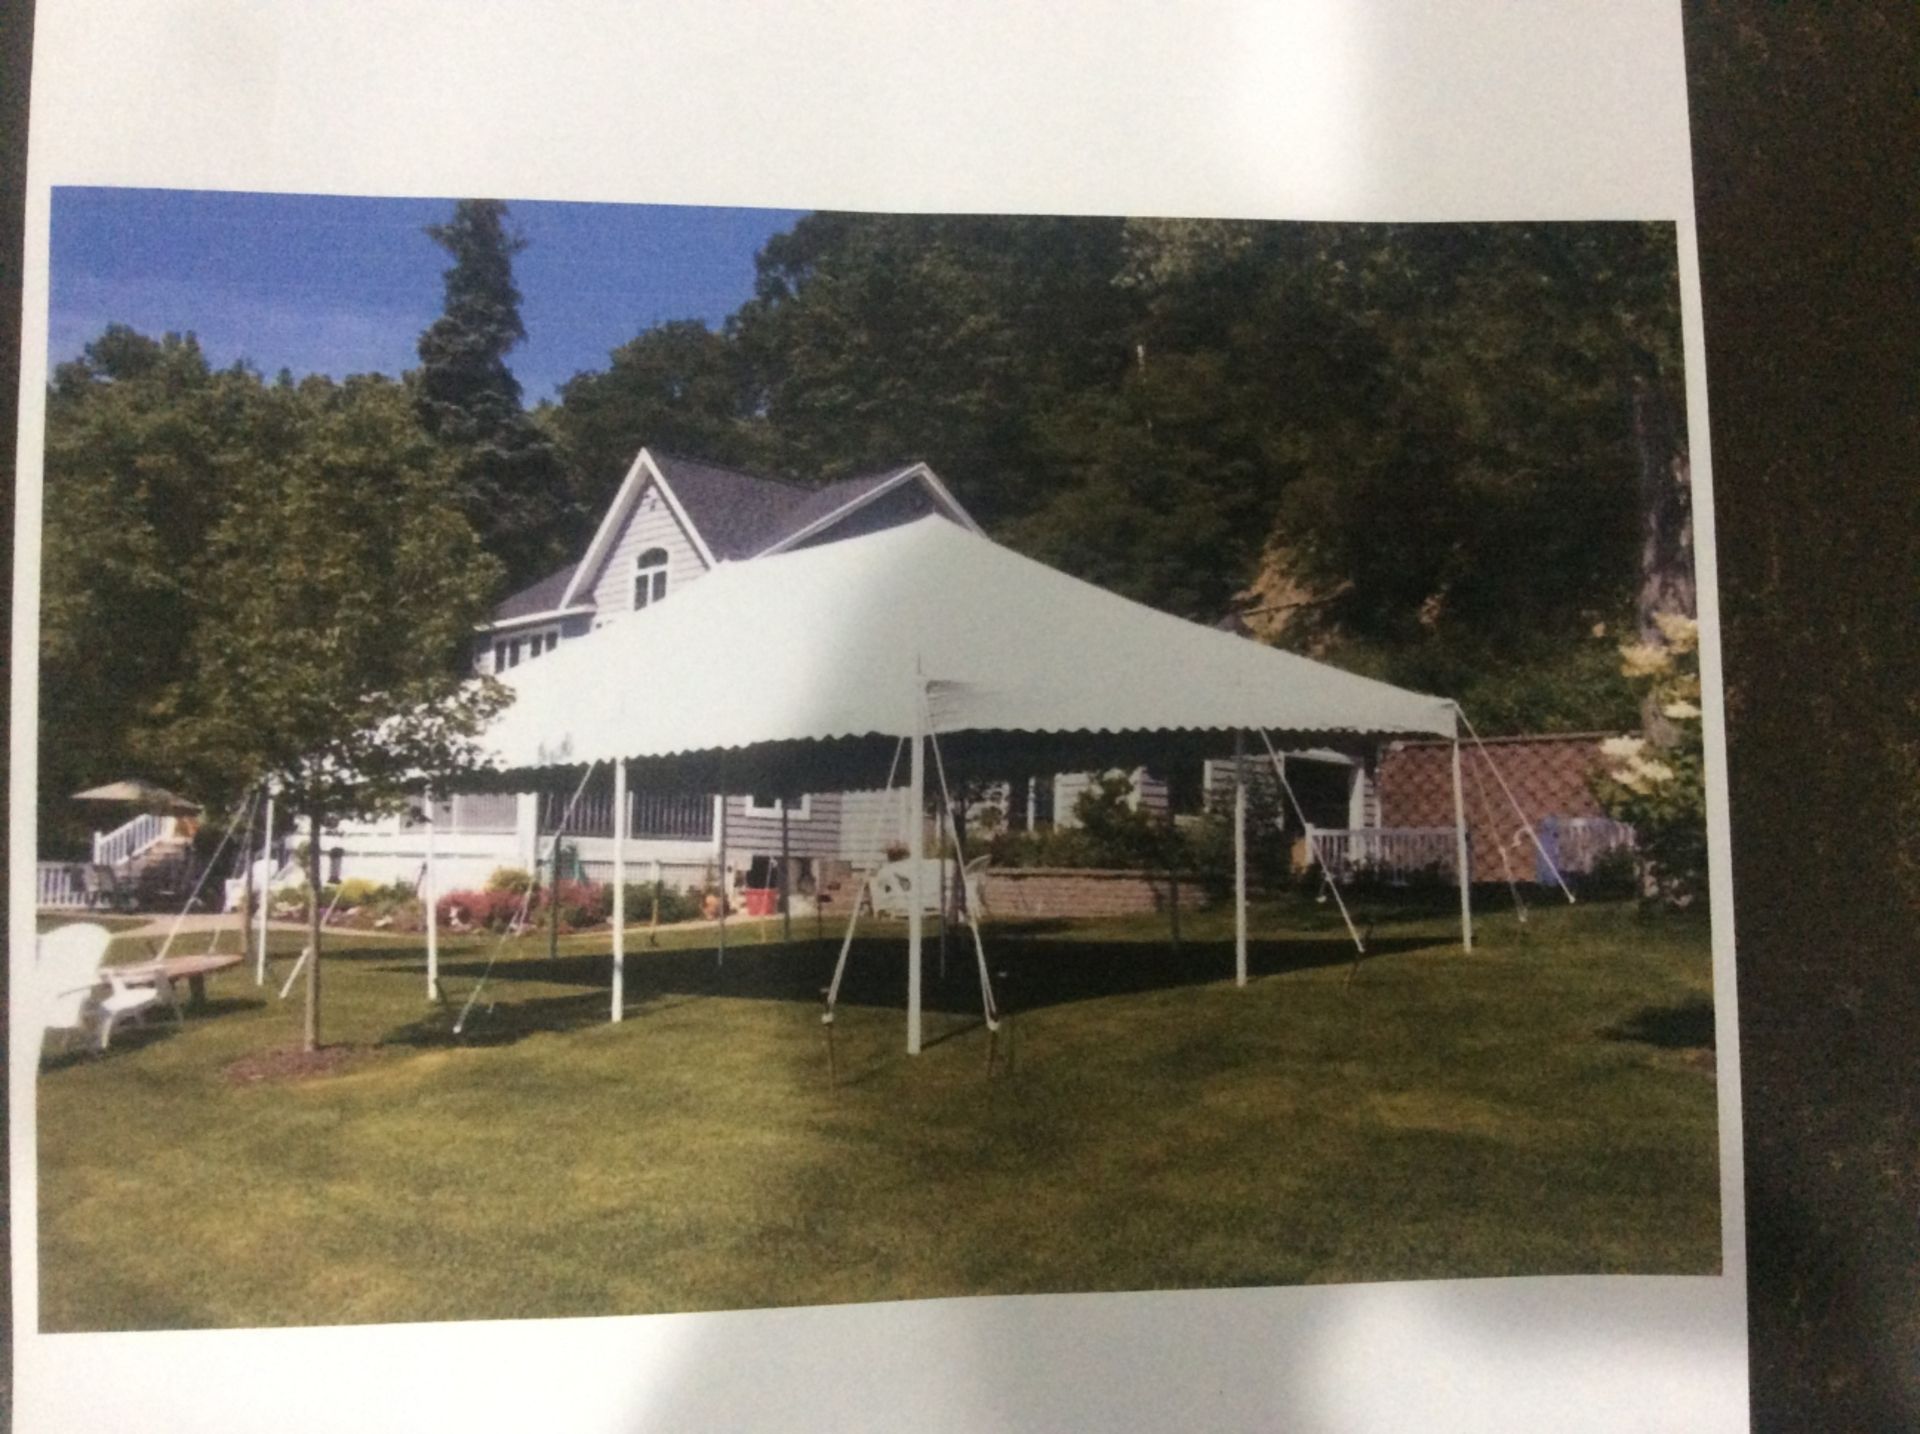 COMPLETE TENT WITH TOP AND POLES 20 X 20 WITH WHITE TOP